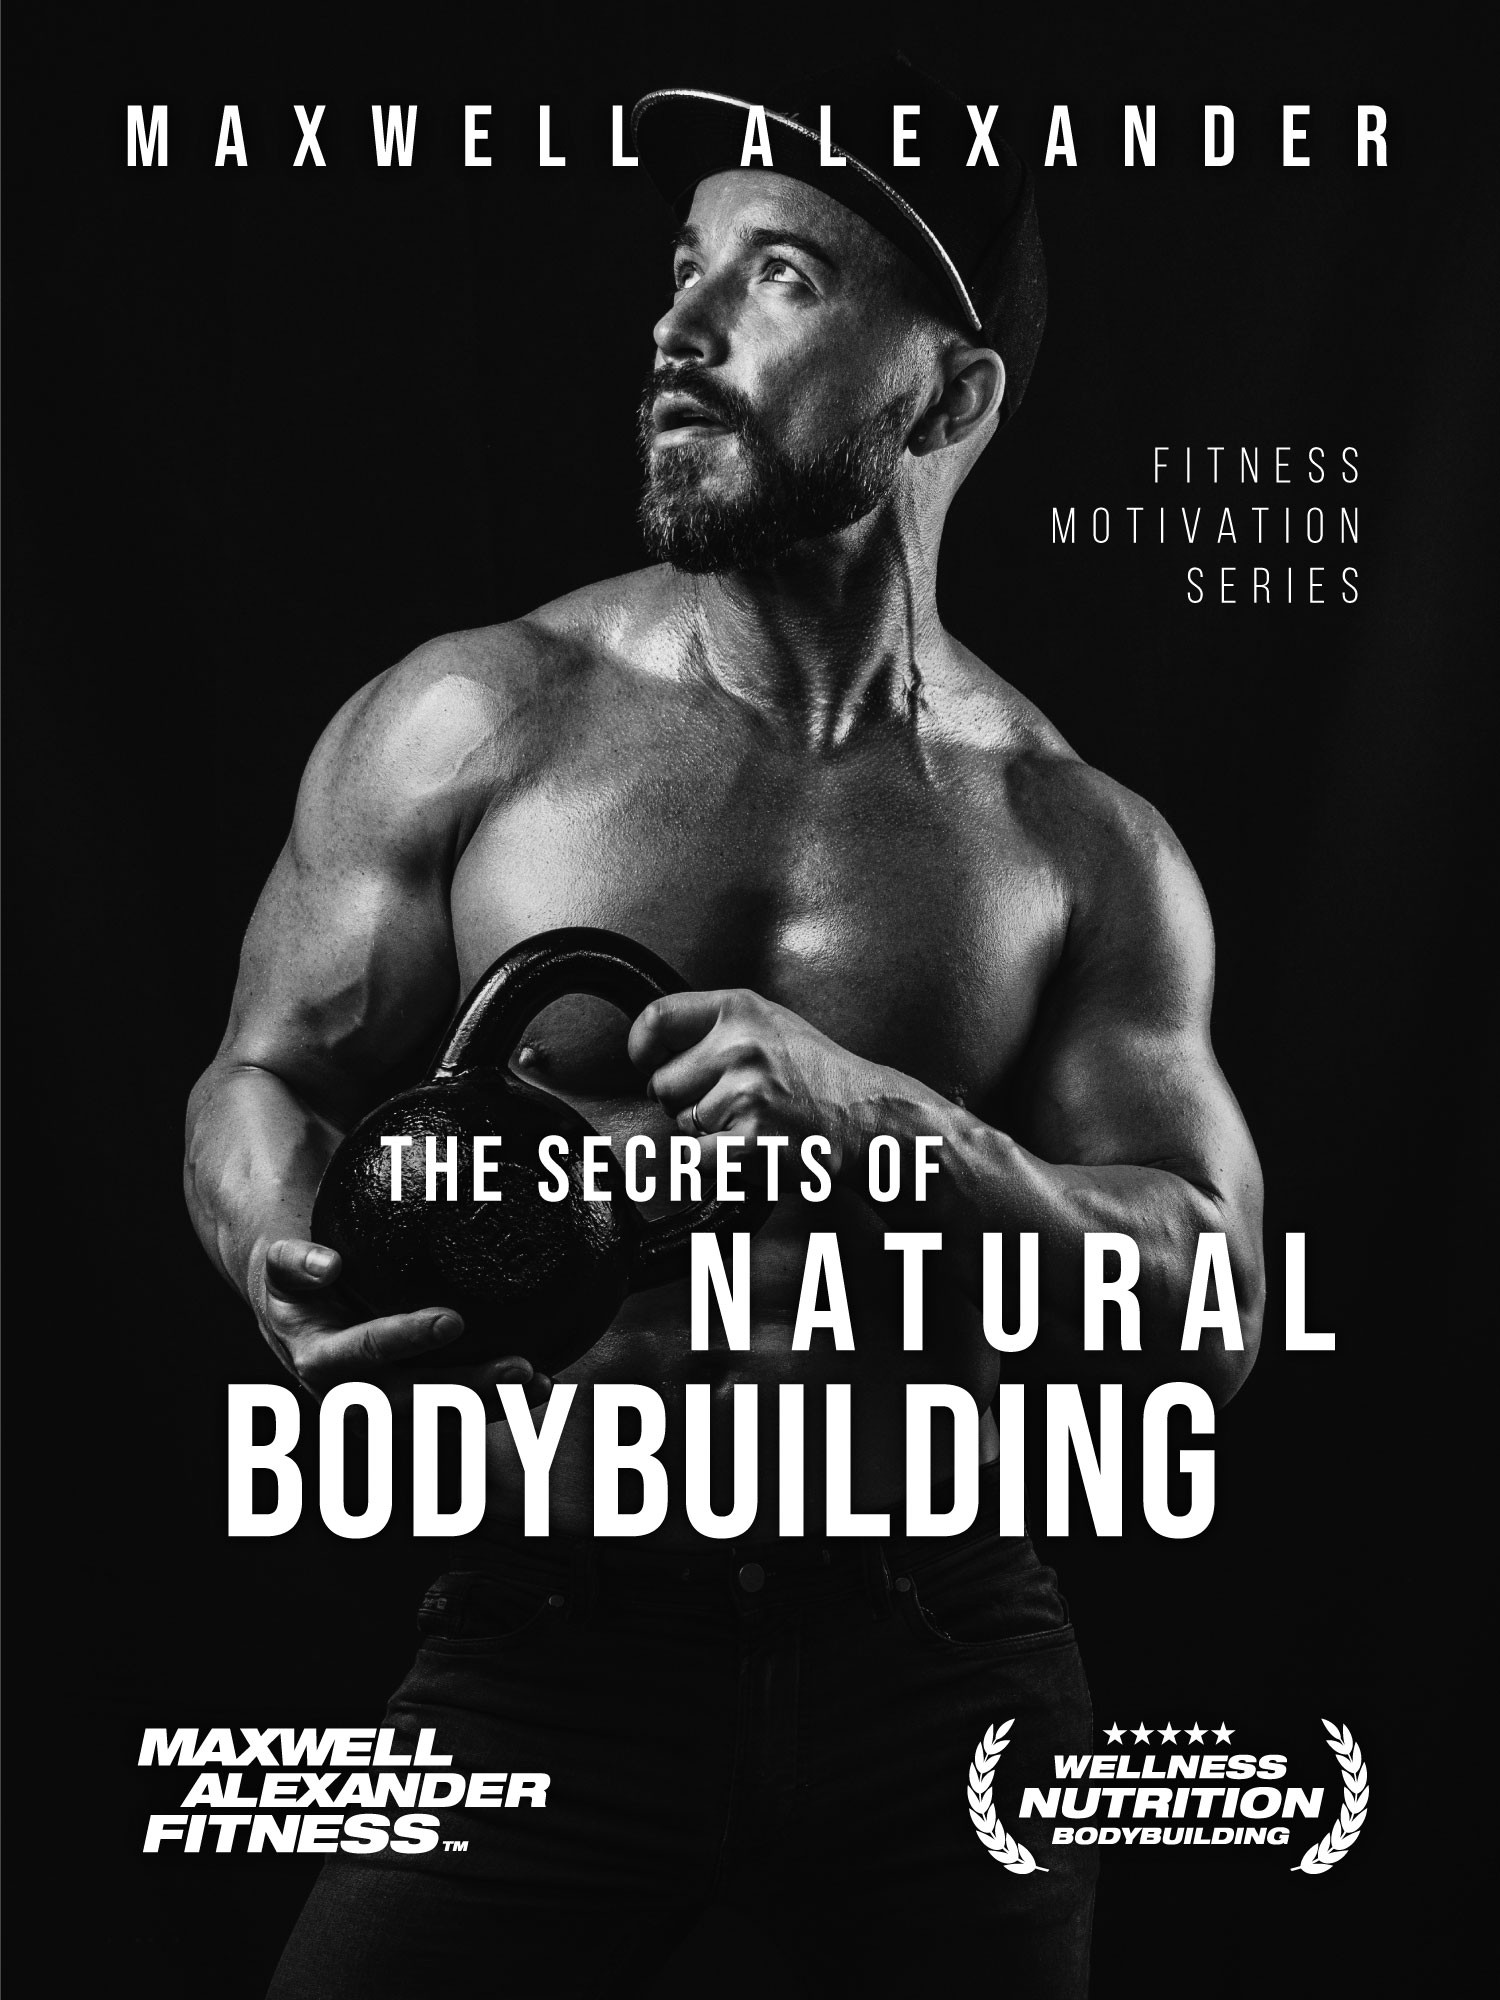 The Secrets of Natural Bodybuilding with Coach Maxwell Alexander